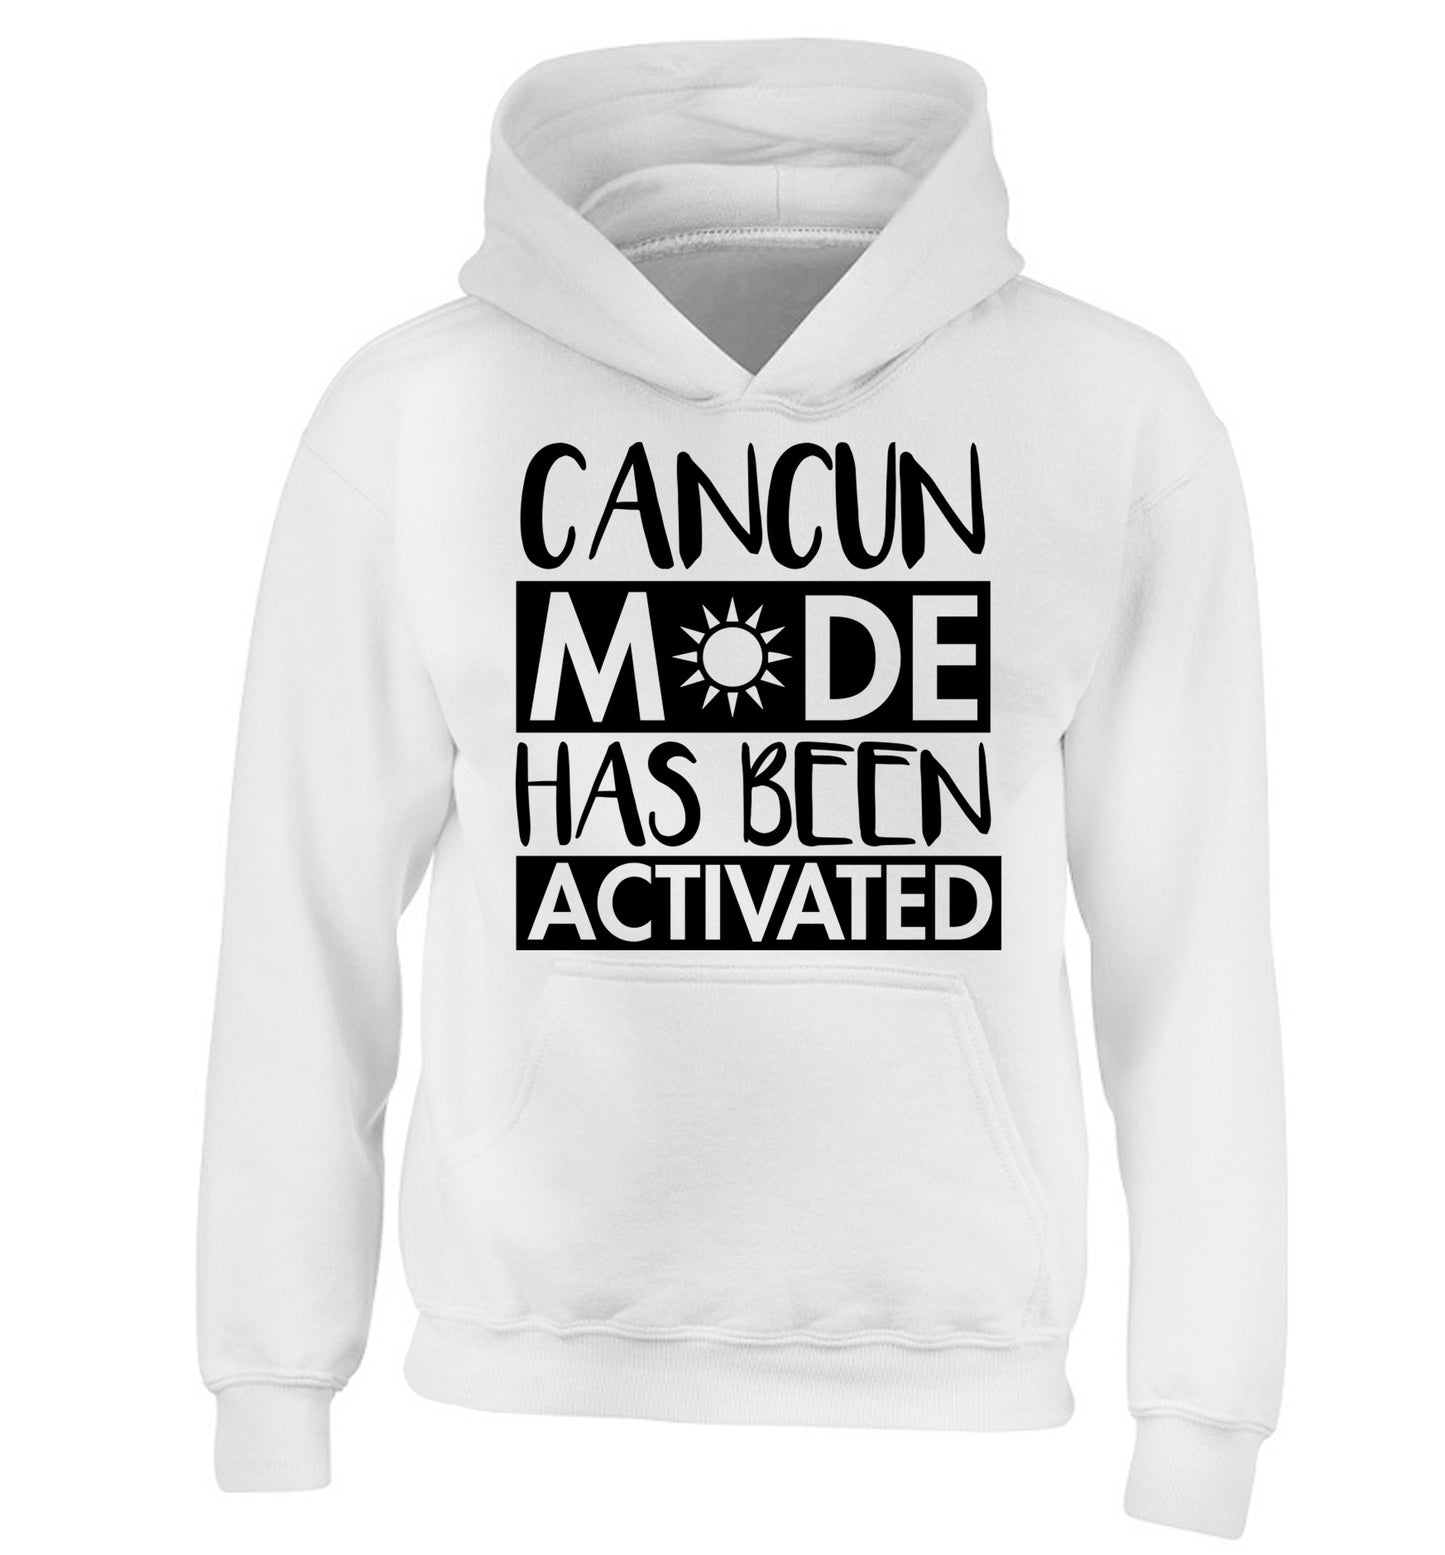 Cancun mode has been activated children's white hoodie 12-14 Years